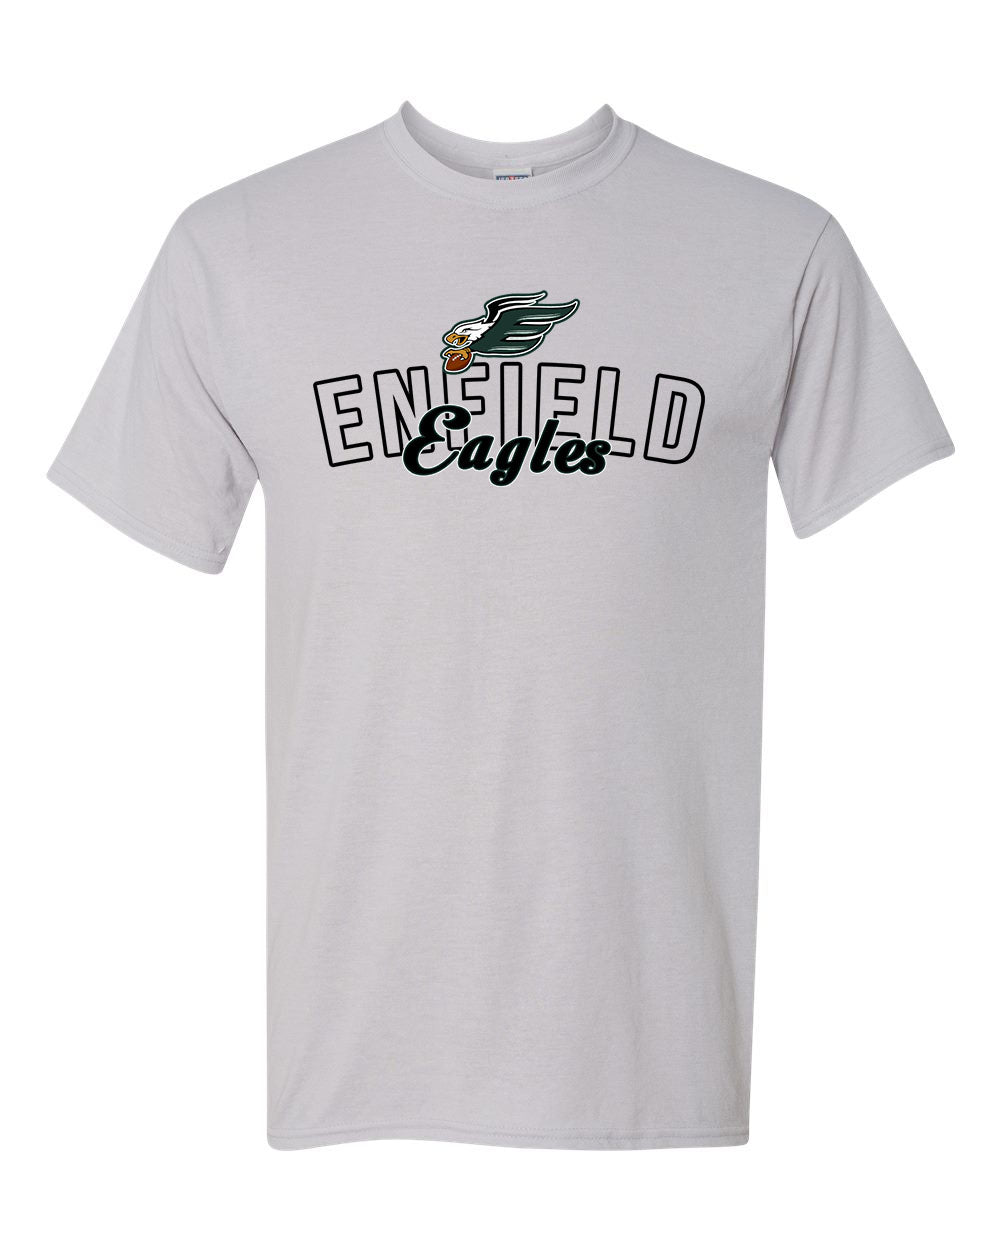 Enfield Eagles Football Adult Performance T "Cursive" - 21MR (color options available)